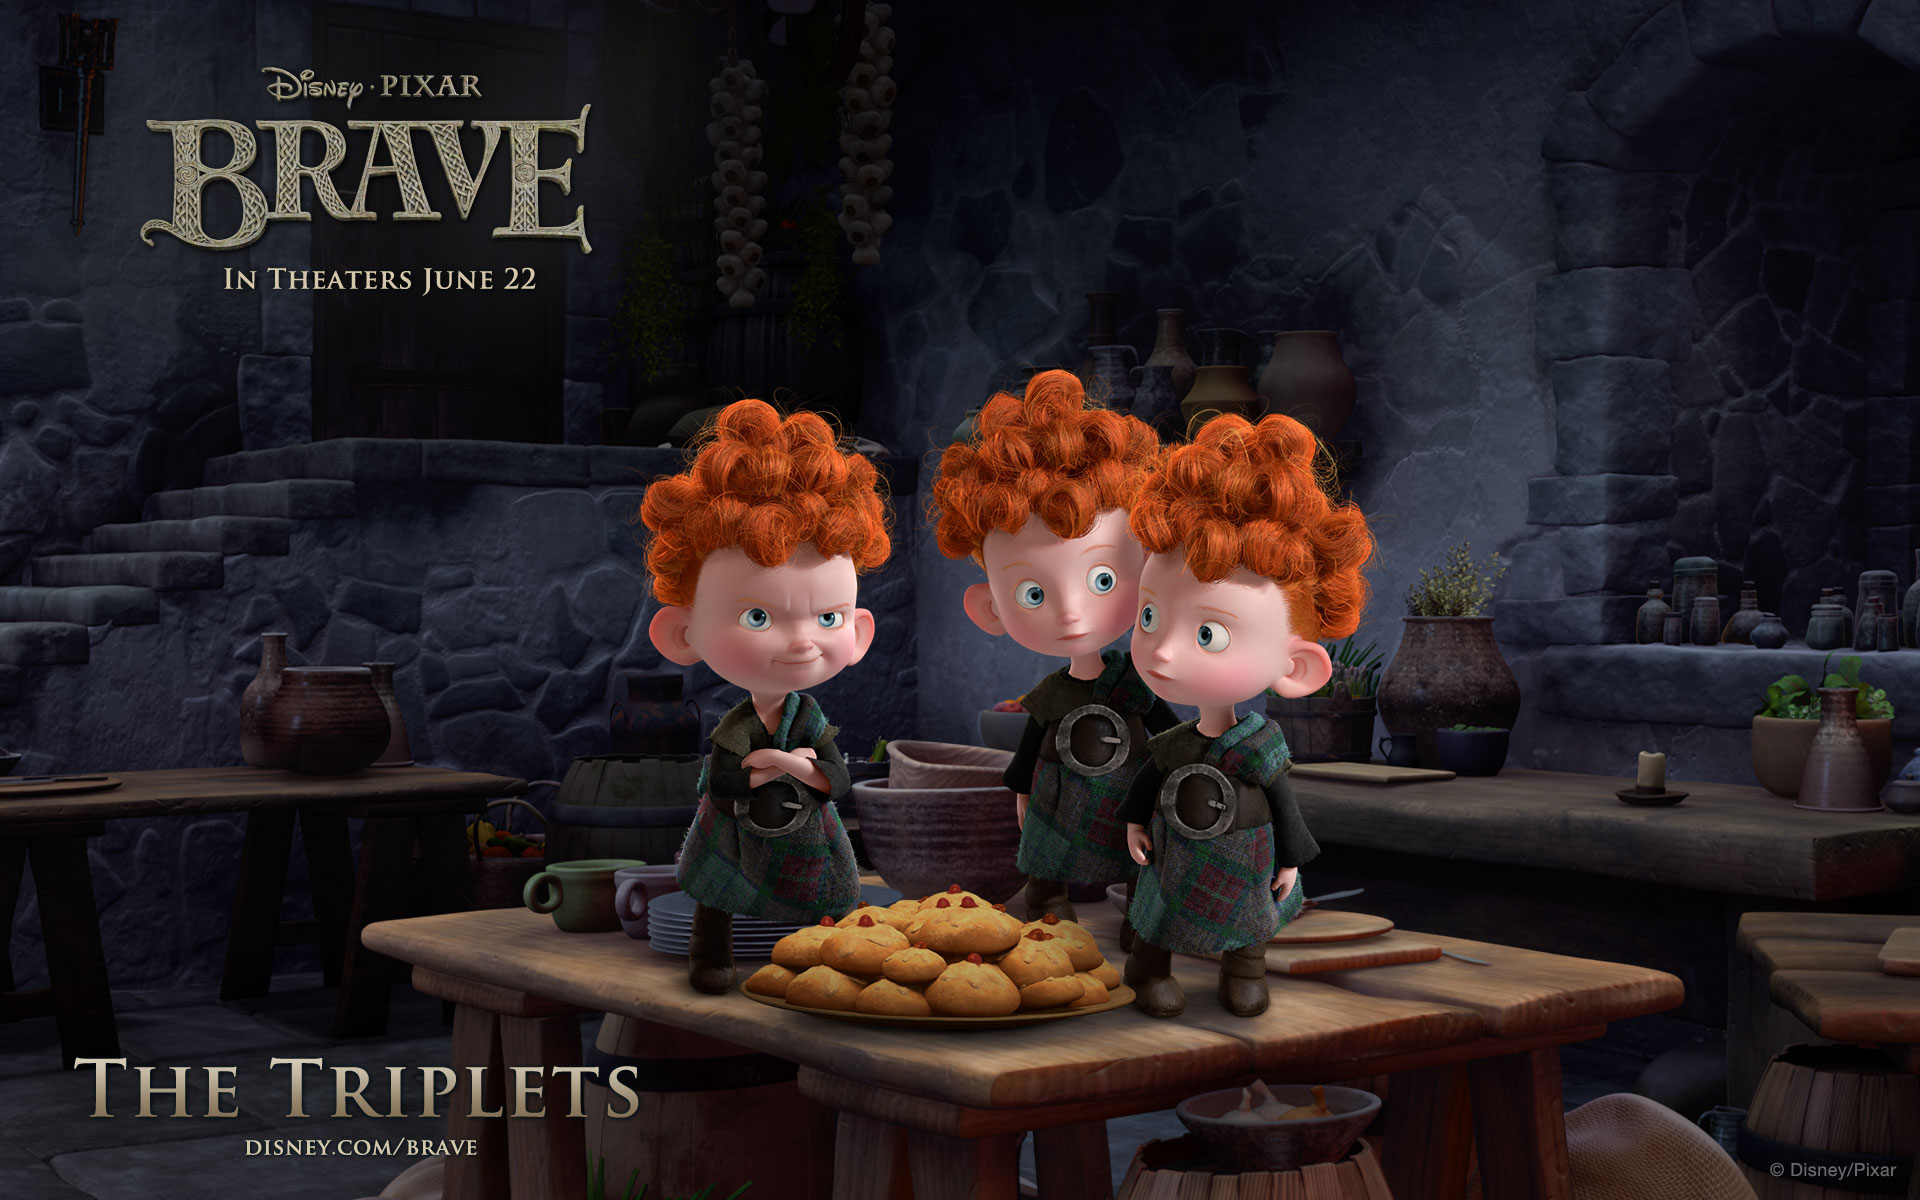 brothers brave movie characters